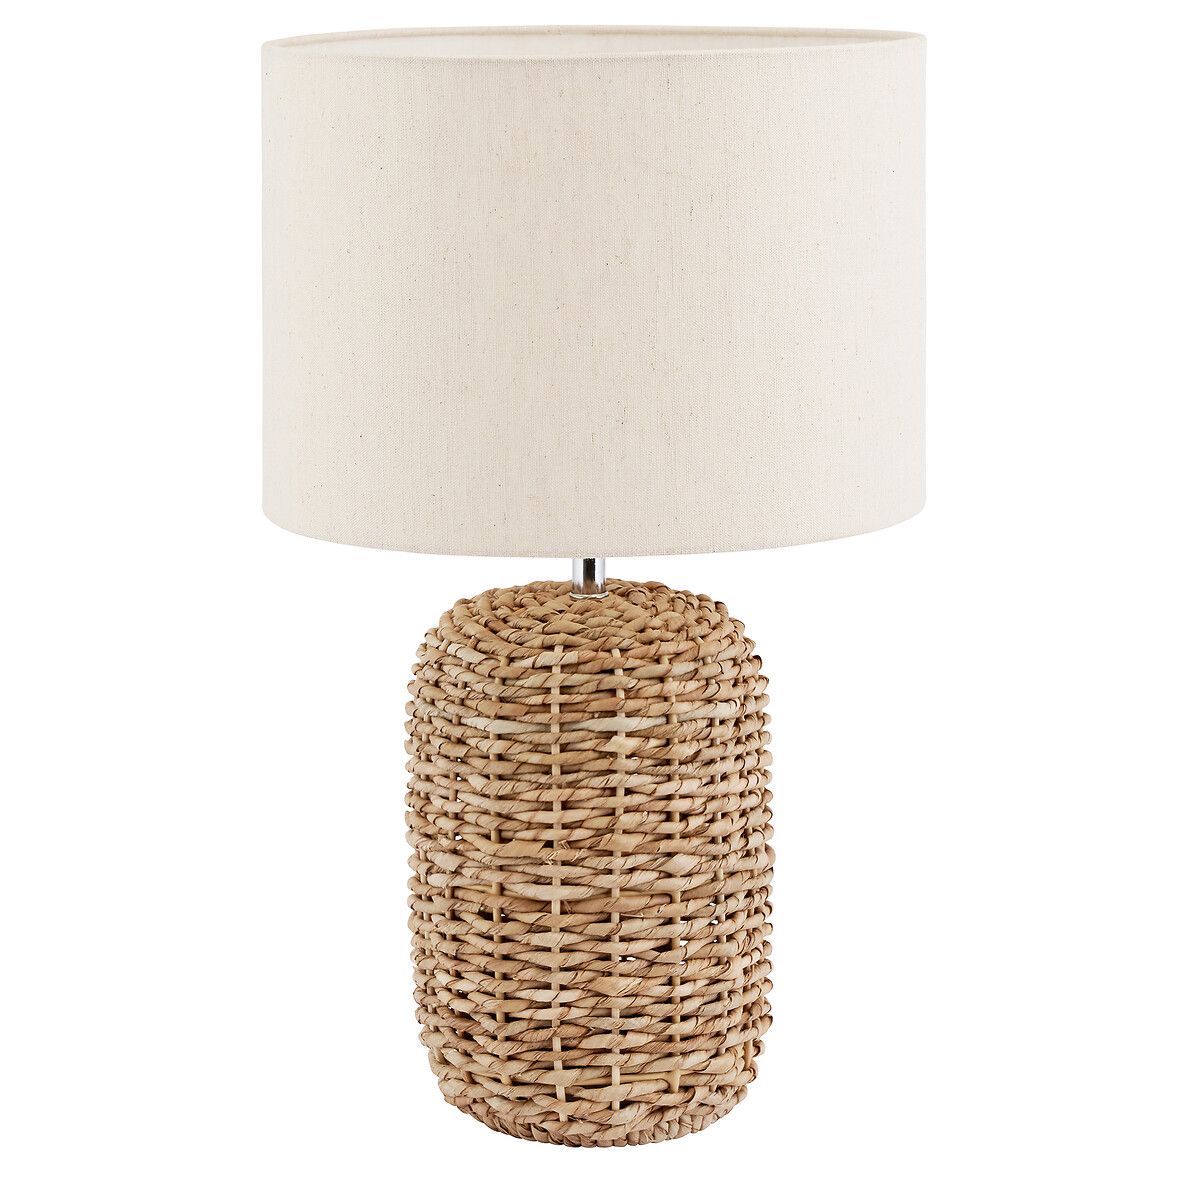 Natural Woven Tall Table Lamp | La Redoute (UK)